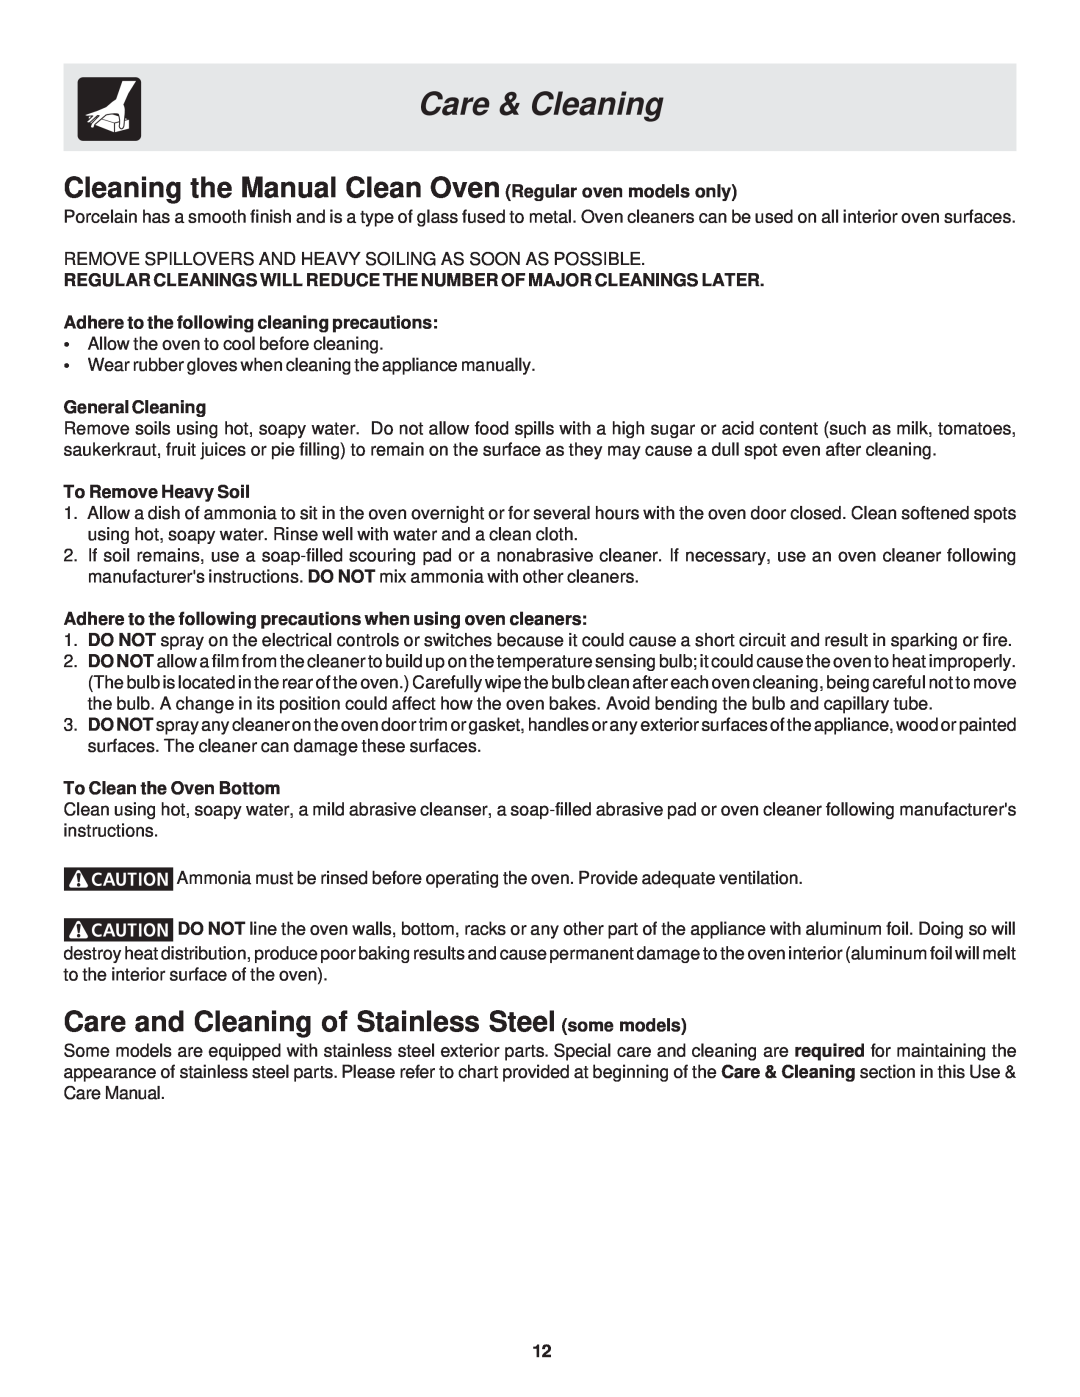 Frigidaire 318200929 warranty Cleaning the Manual Clean Oven Regular oven models only, Care & Cleaning, General Cleaning 